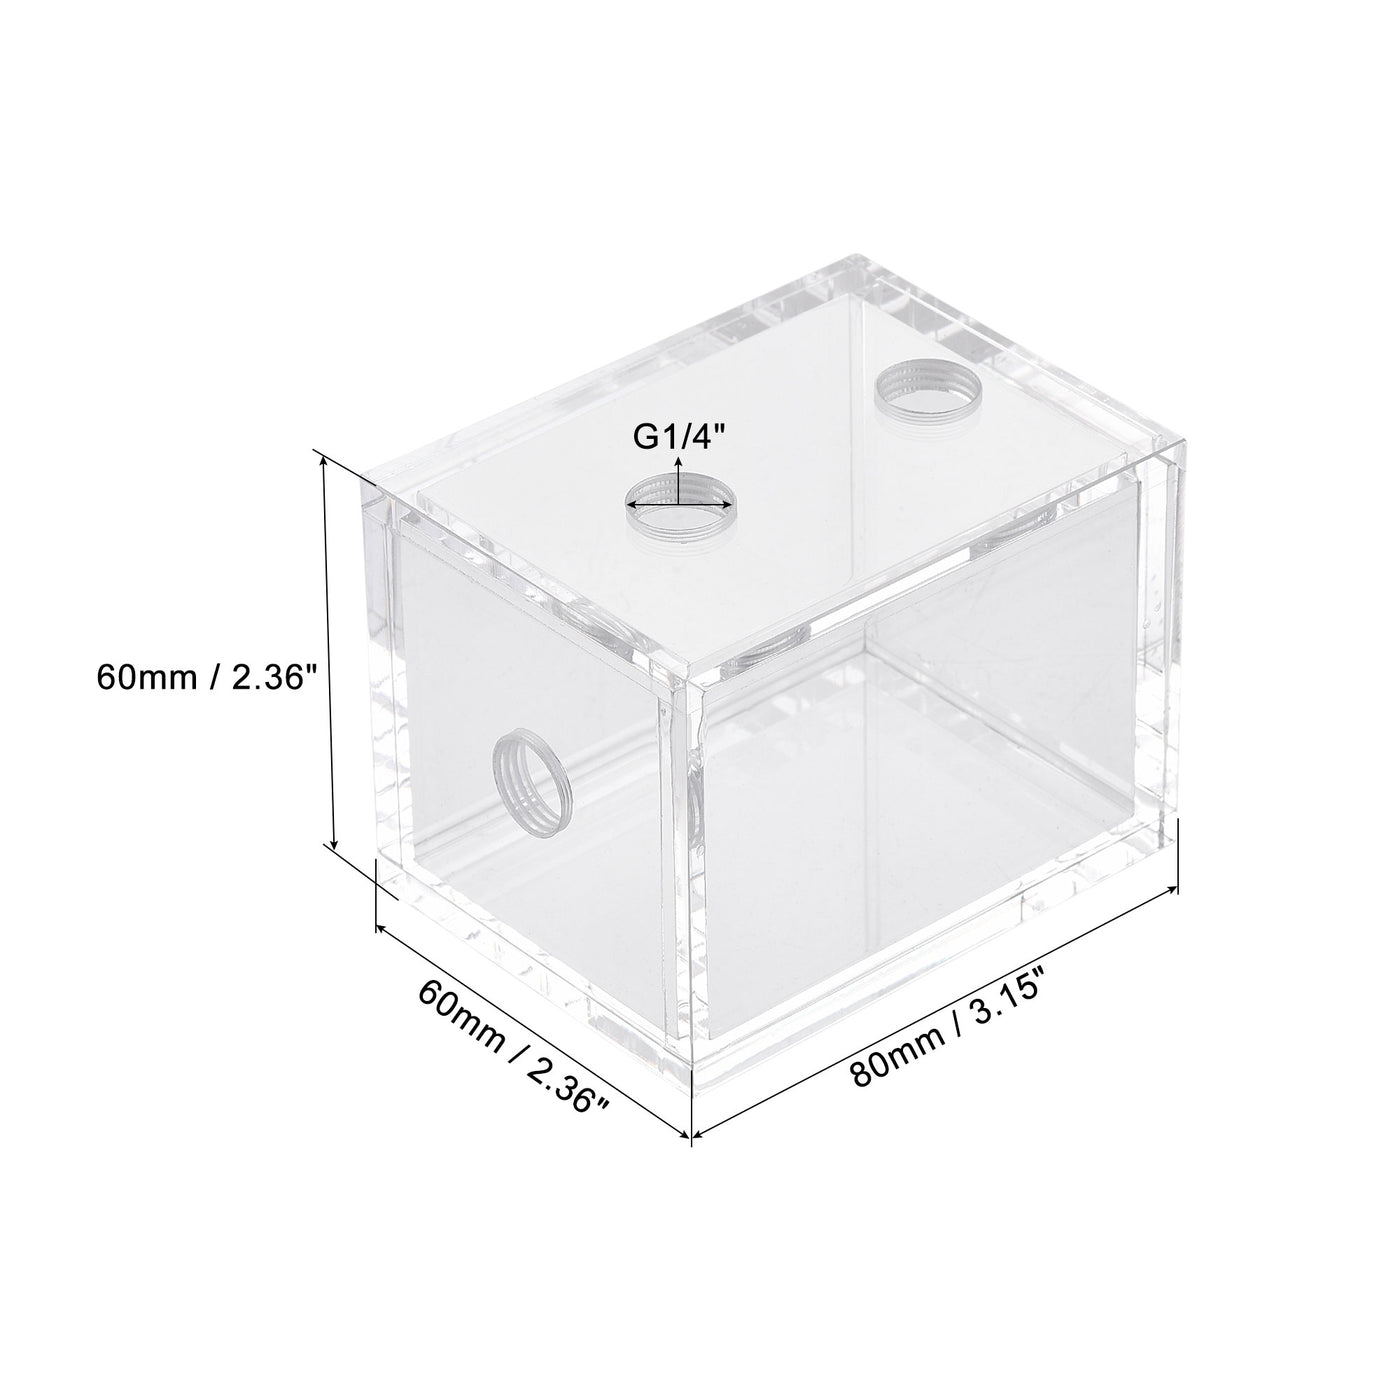 uxcell Uxcell Acrylic Water Cooling Tank 80x60x60mm with 3 Hole for Computer CPU Cooled